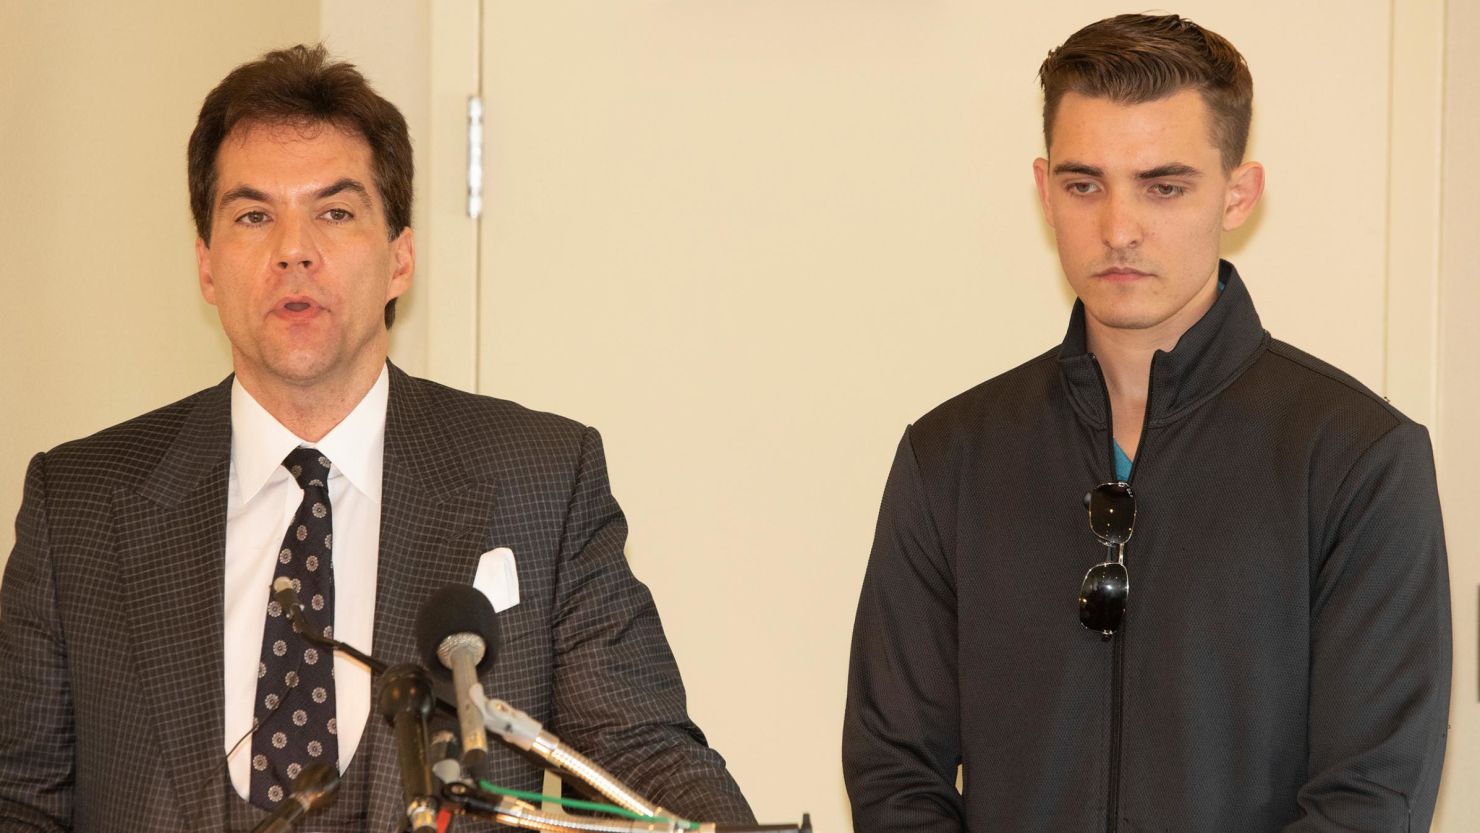 Jack Burkman and Jacob Wohl speak to the media in 2018 in Rosslyn, Virginia.